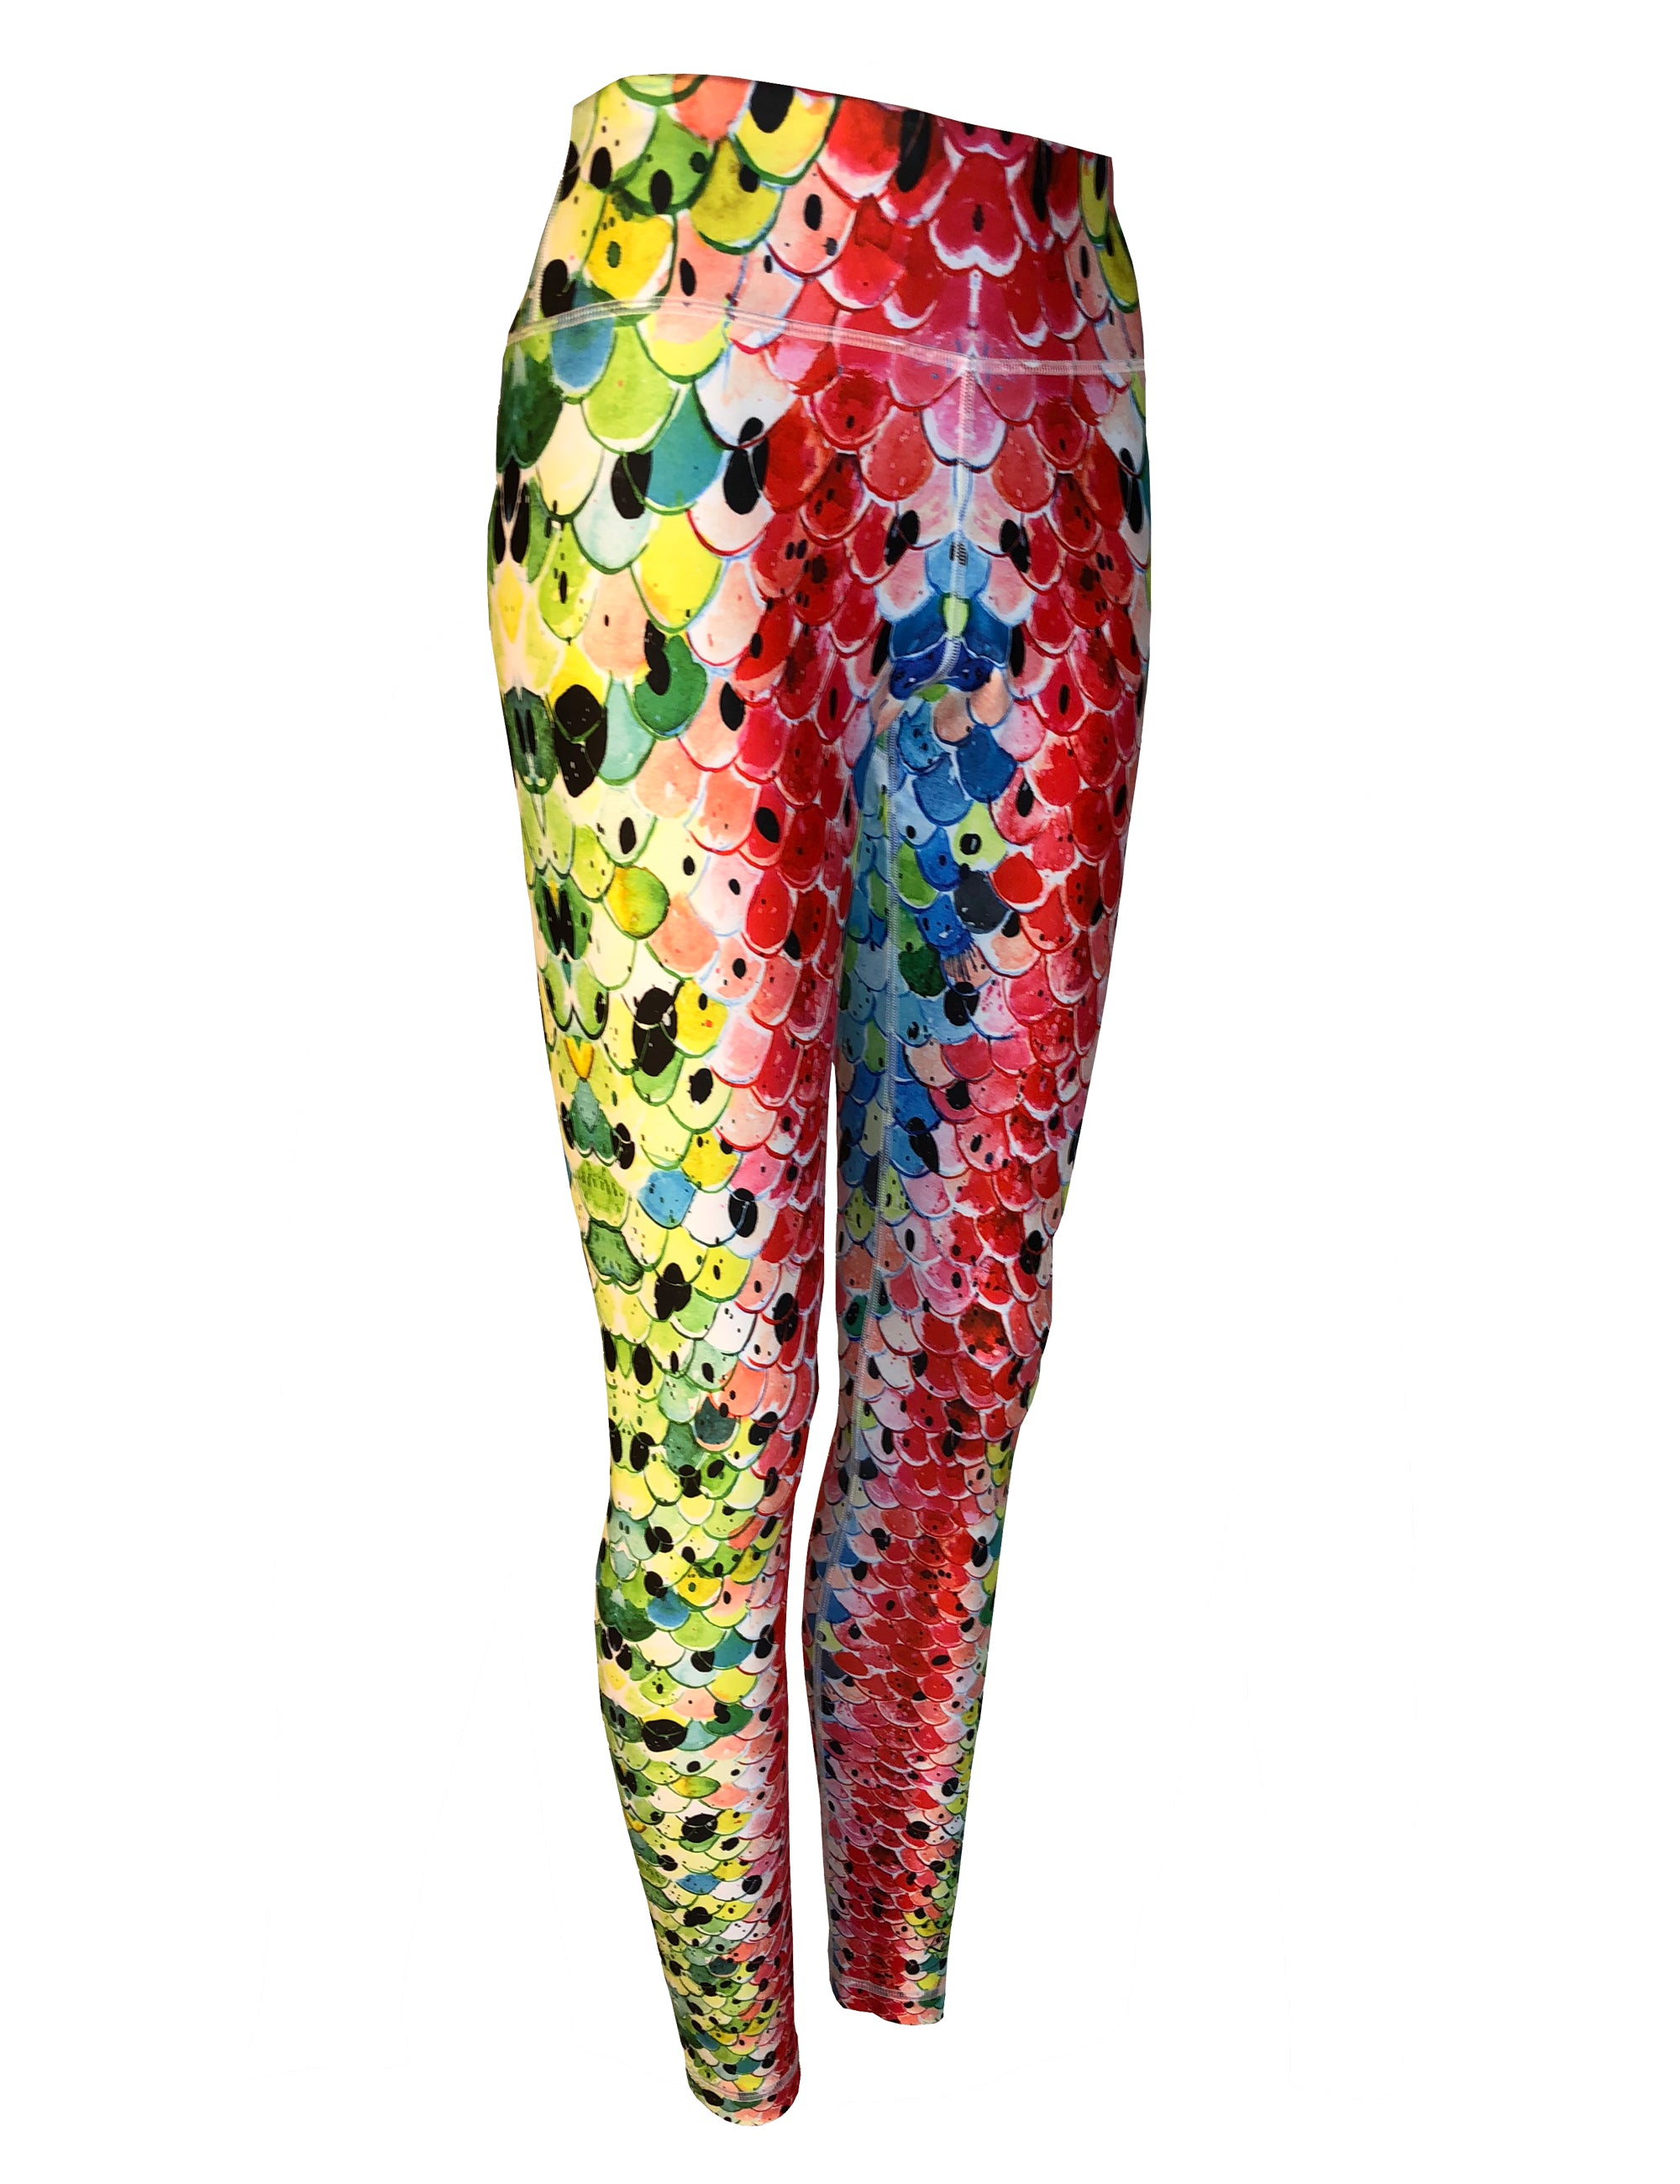 Rainbow#3 Trout All Sport Leggings  Women's Fly Fishing Clothing - Cognito  Brands, Inc.